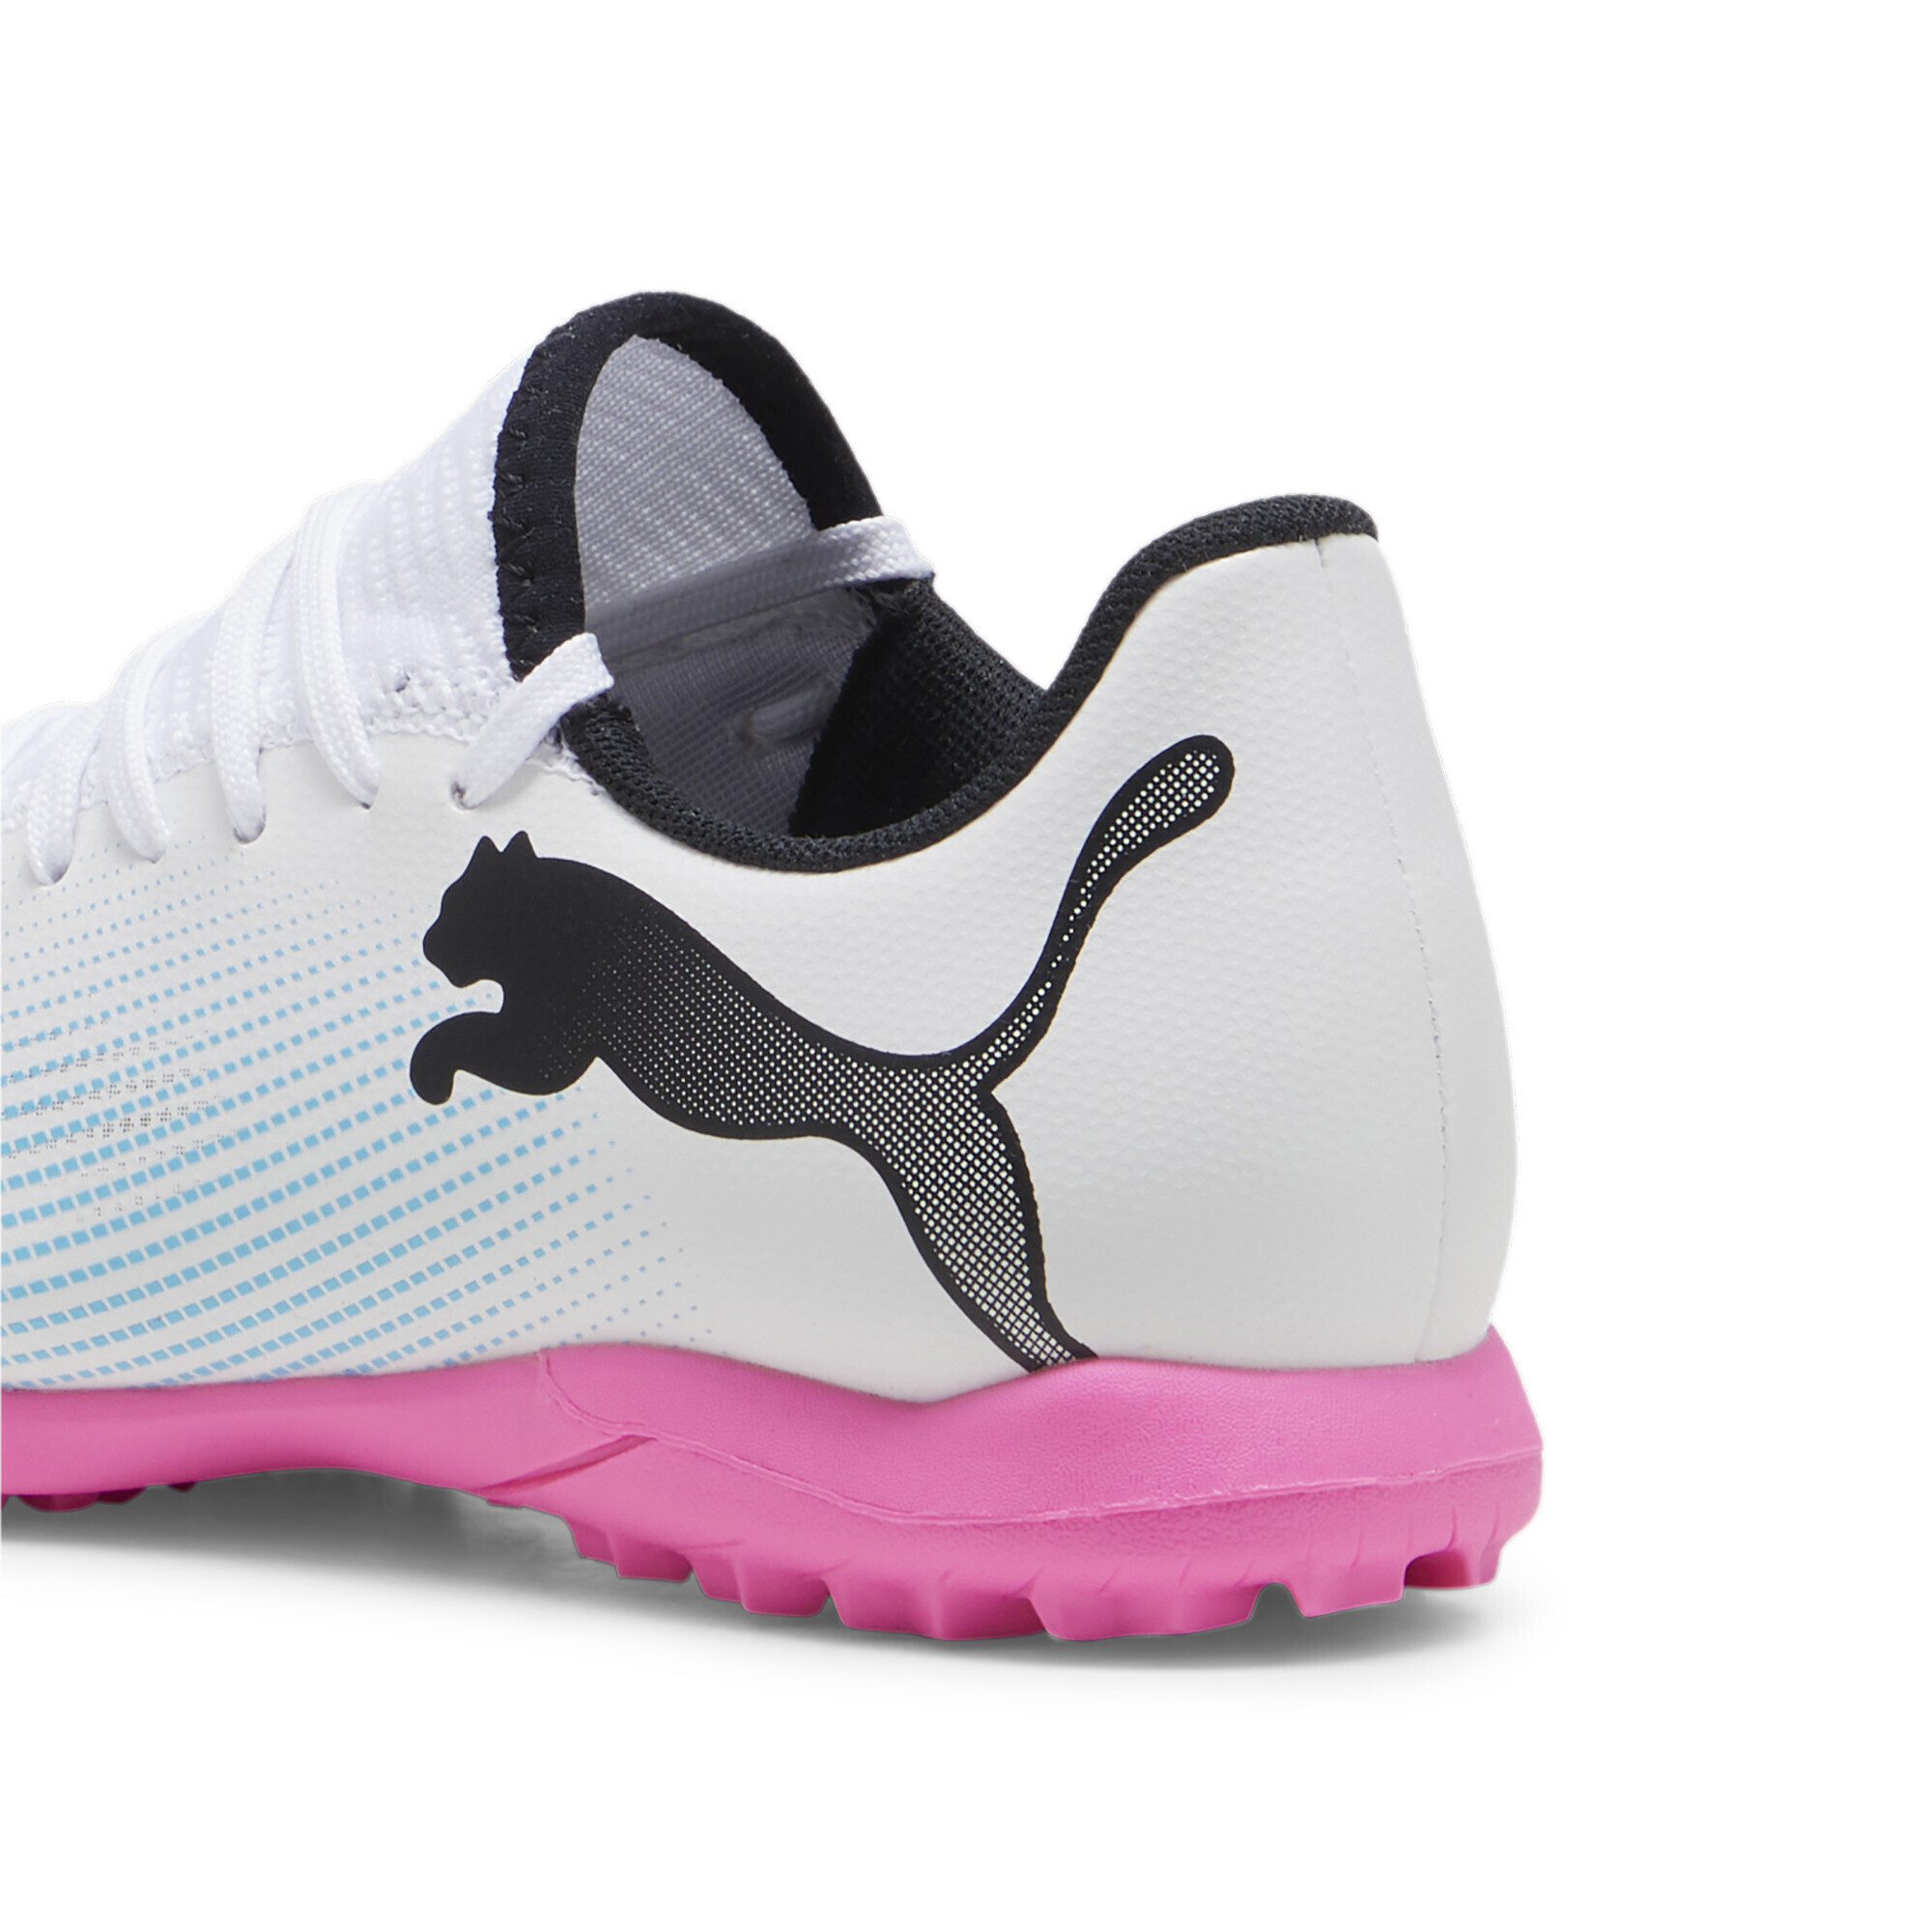 PUMA FUTURE 7 PLAY TT Youth Football Boots In White/Pink, Size EU 30